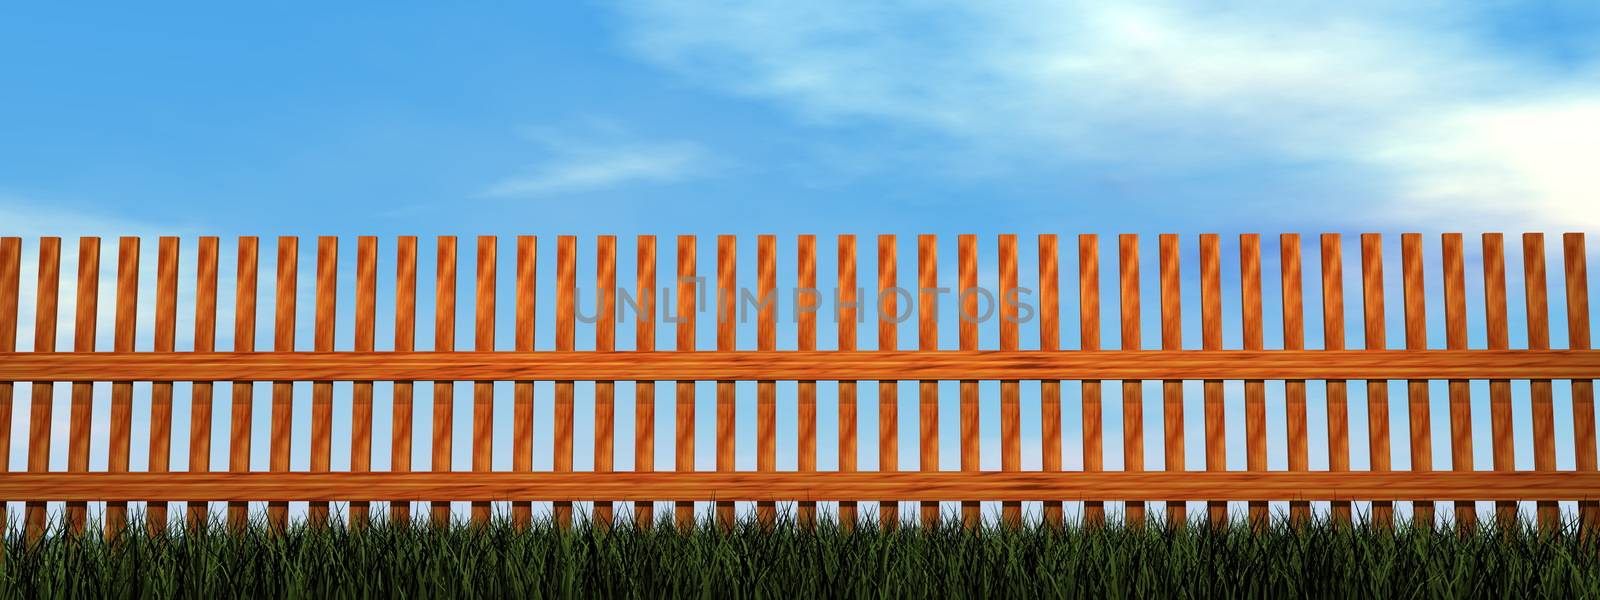 Wooden fence - 3D render by Elenaphotos21